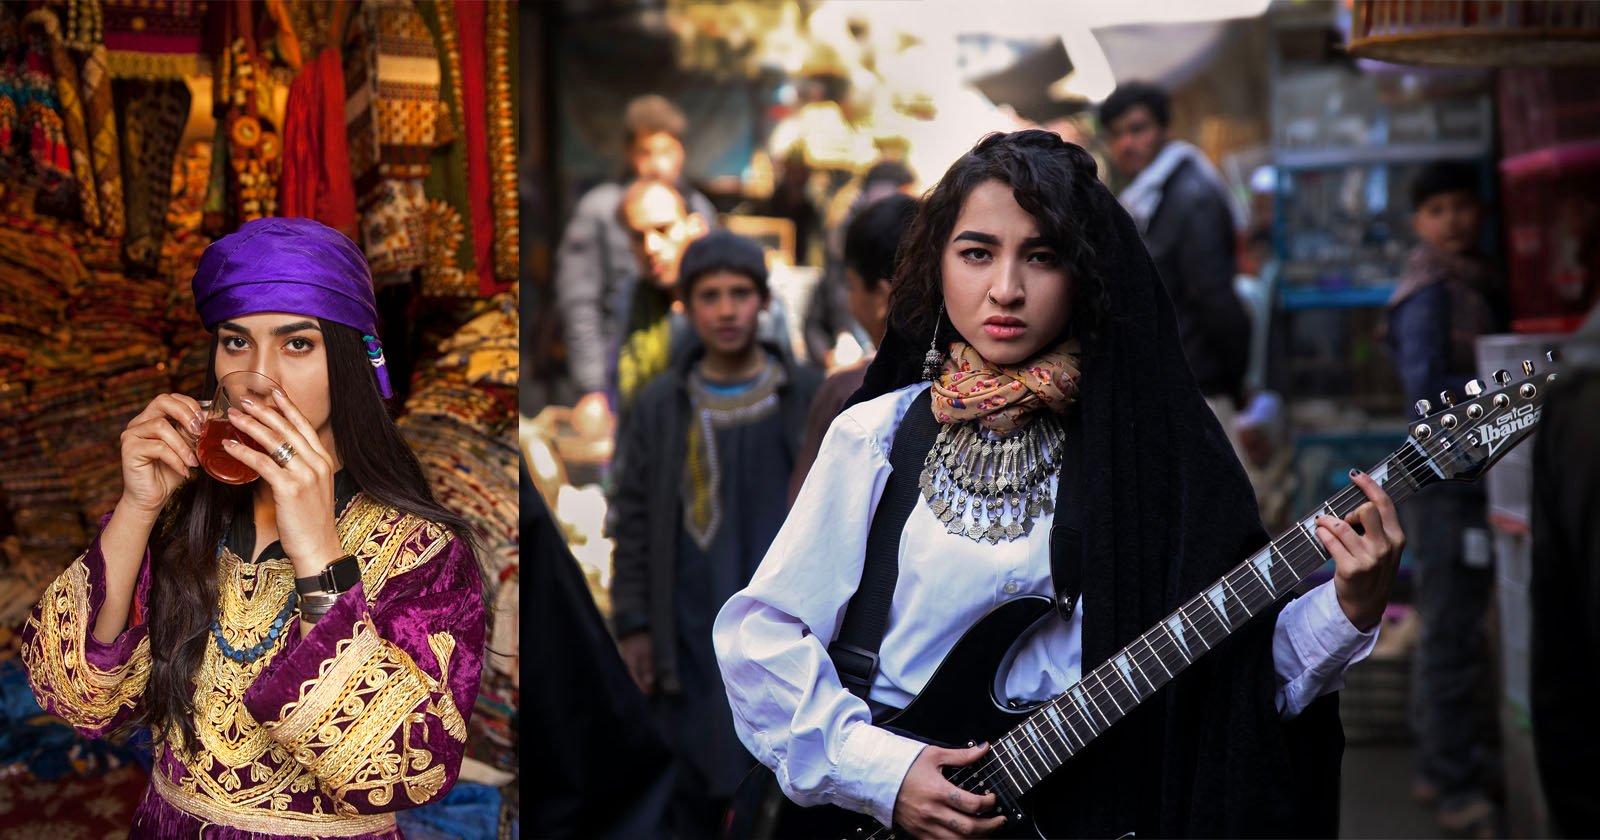 Two women are in distinct traditional settings. On the left, a woman dressed in ornate traditional attire holds a musical instrument to her lips. On the right, another woman stands in a vibrant market, wearing traditional jewelry and holding an electric guitar.